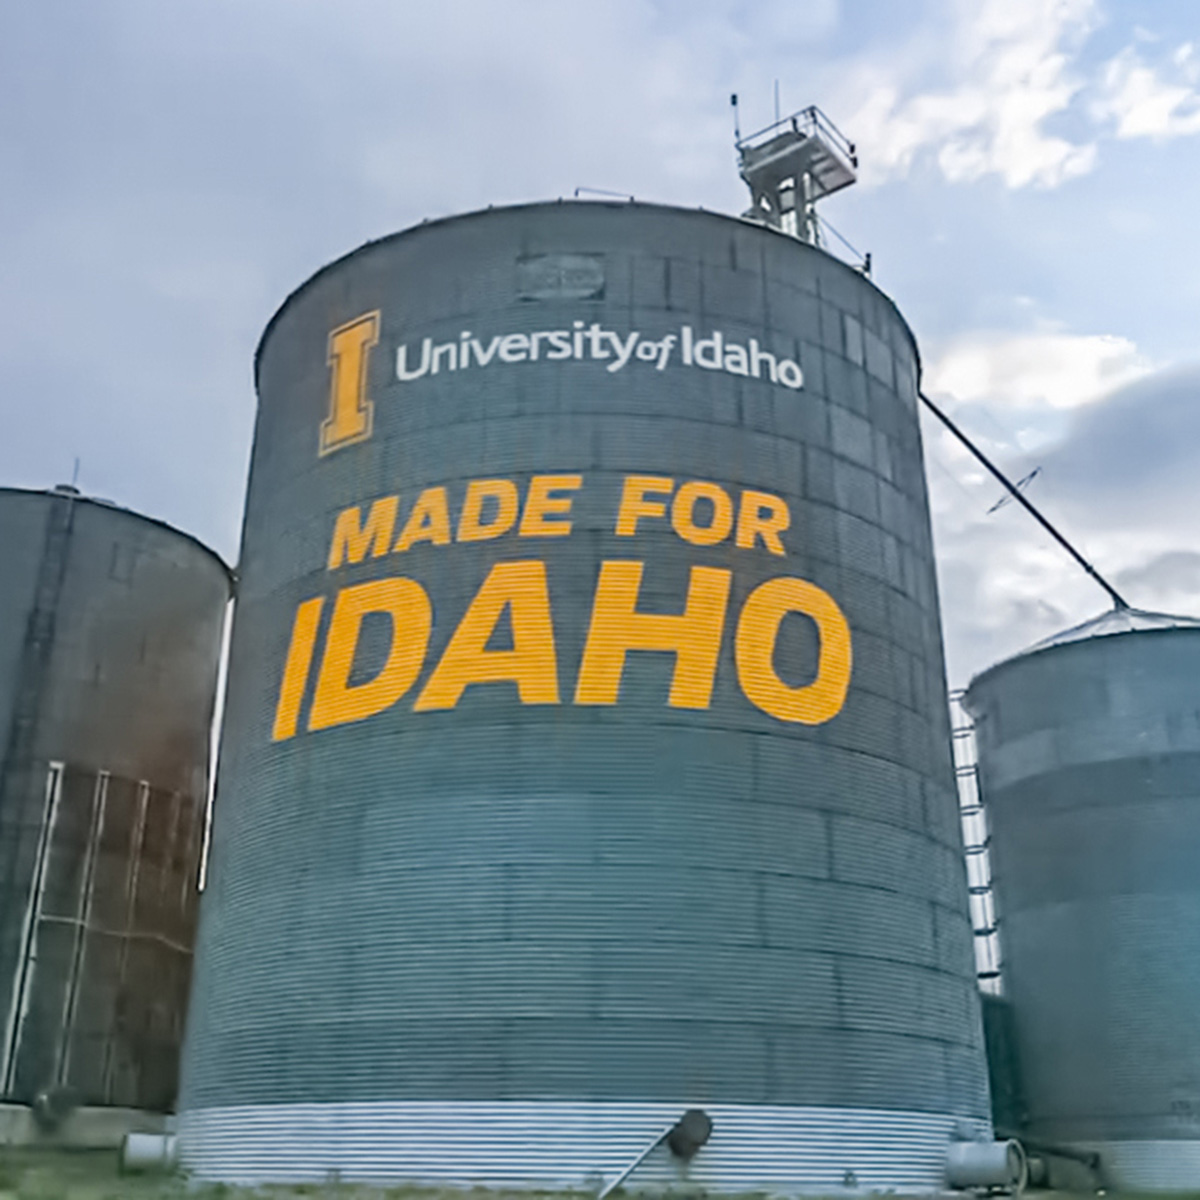 Grain bin with the text "University of Idaho: Made for Idaho" and located in Picabo, Idaho.